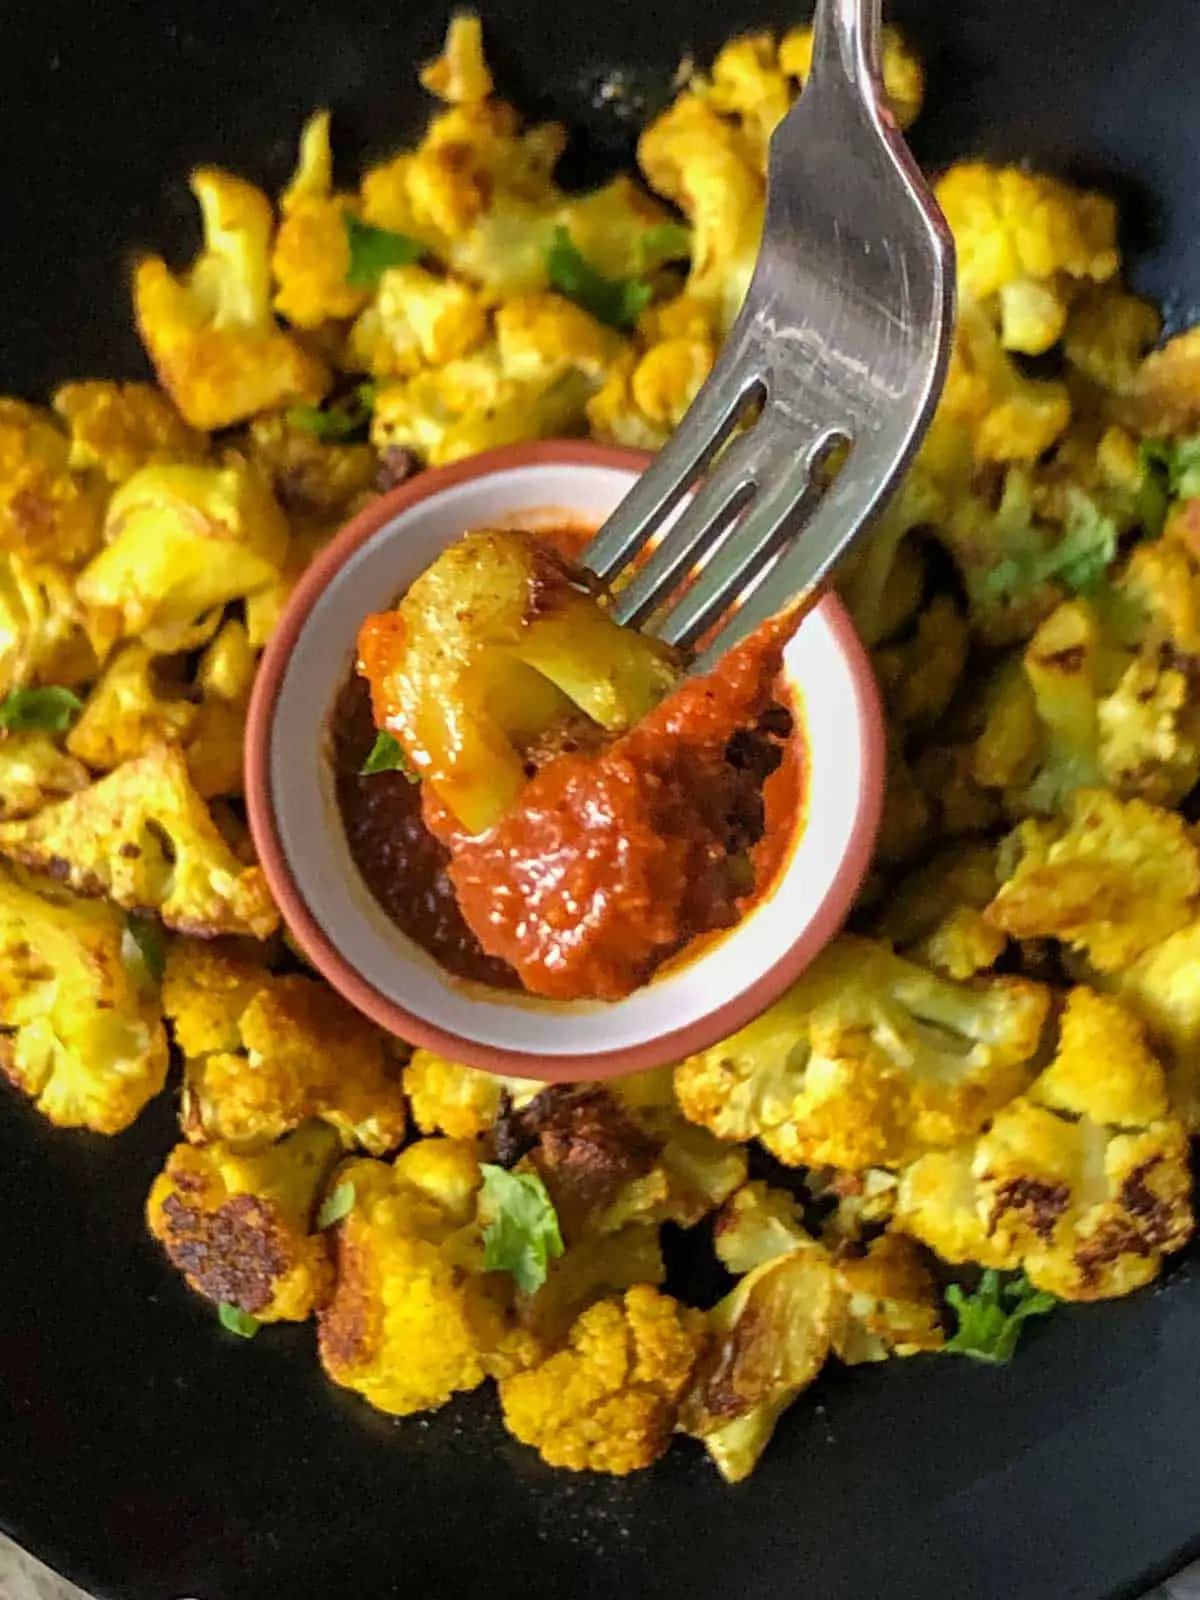 Tender Cauliflower florets roasted with Indian spices garnished with cilantro and a small terracotta bowl with red chutney and a fork piercing one of the florets which was dipped in the chutney.